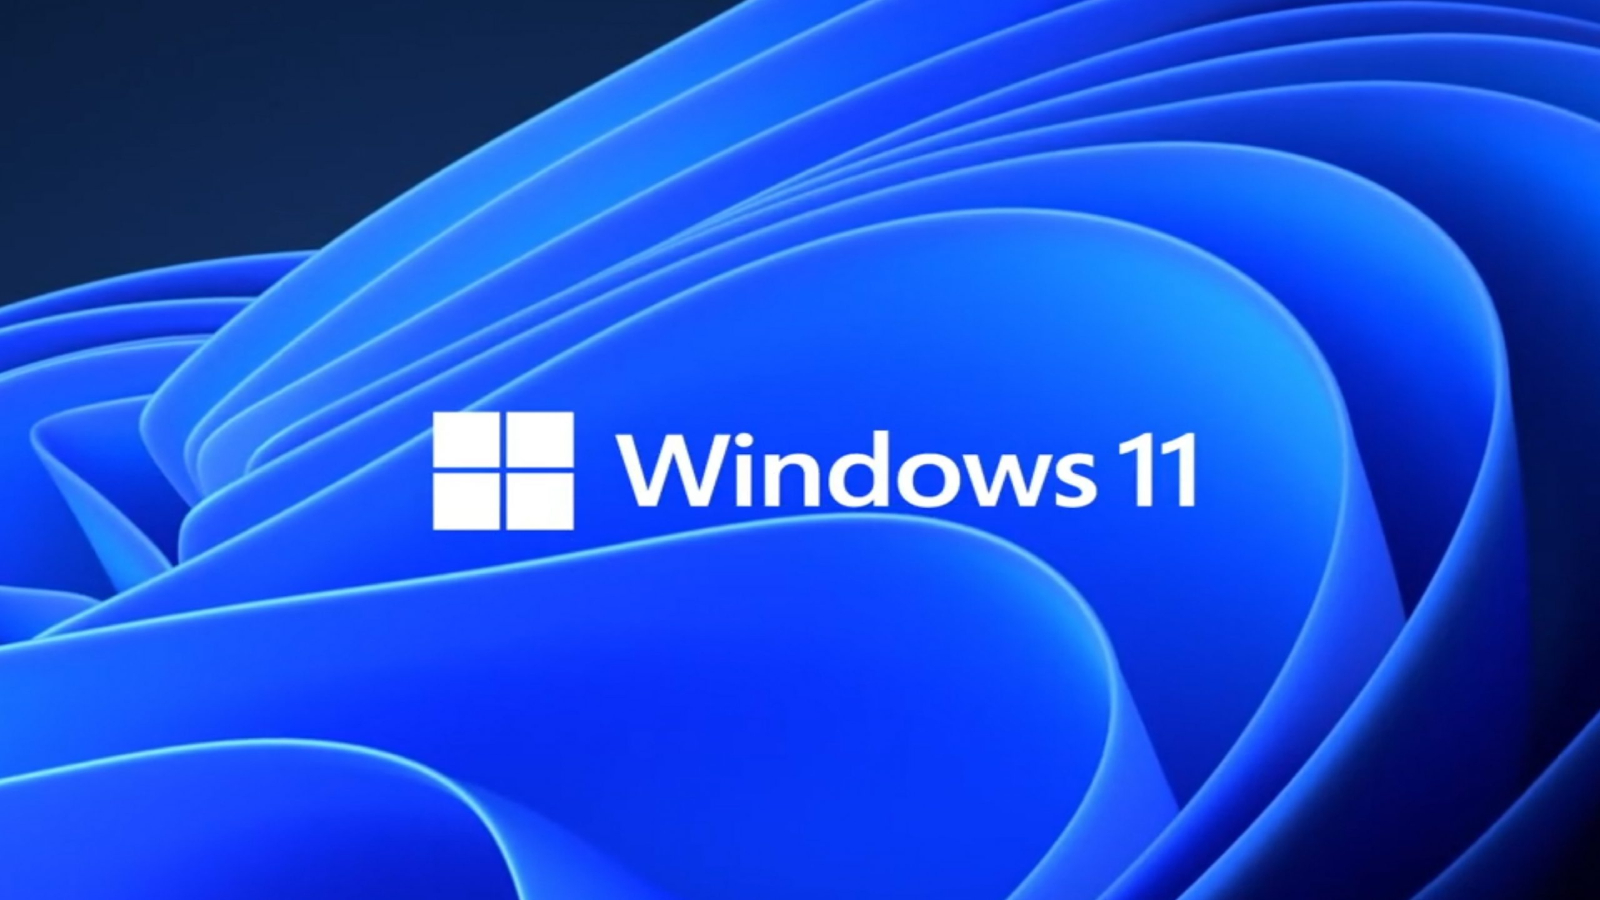 windows 11 official launch date